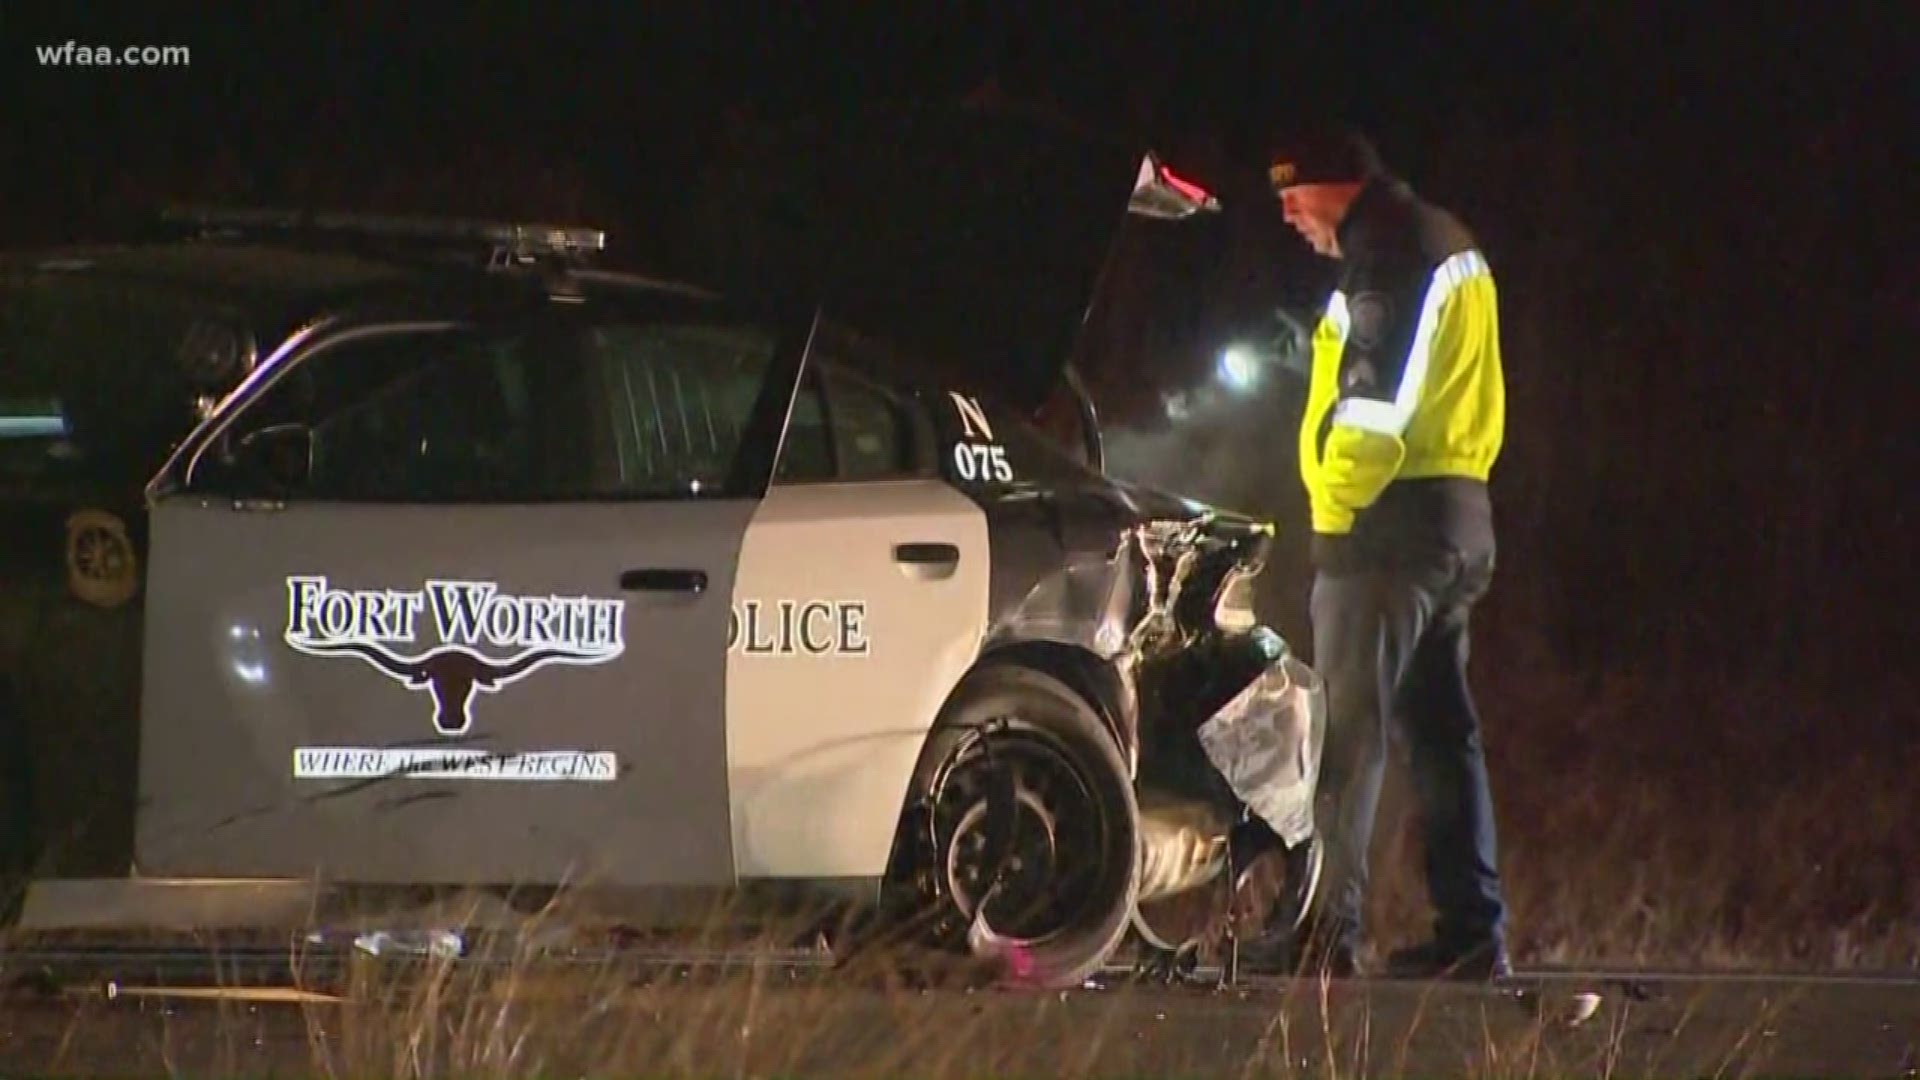 A Fort Worth police officer was struck by a suspected drunken driver early Friday while responding to a crash, police said.